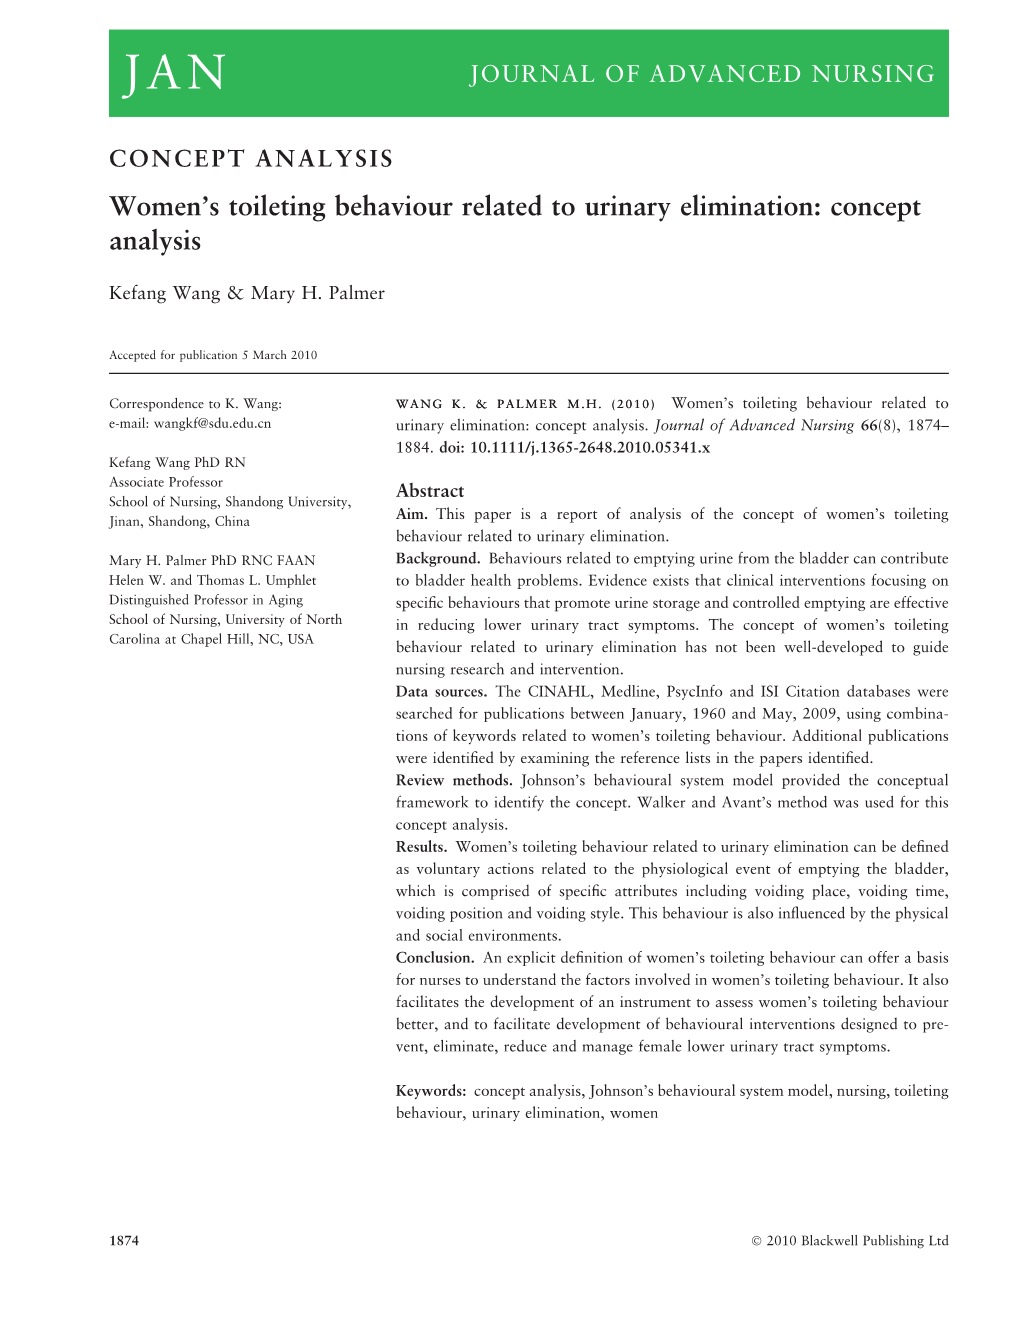 Womens Toileting Behaviour Related to Urinary Elimination